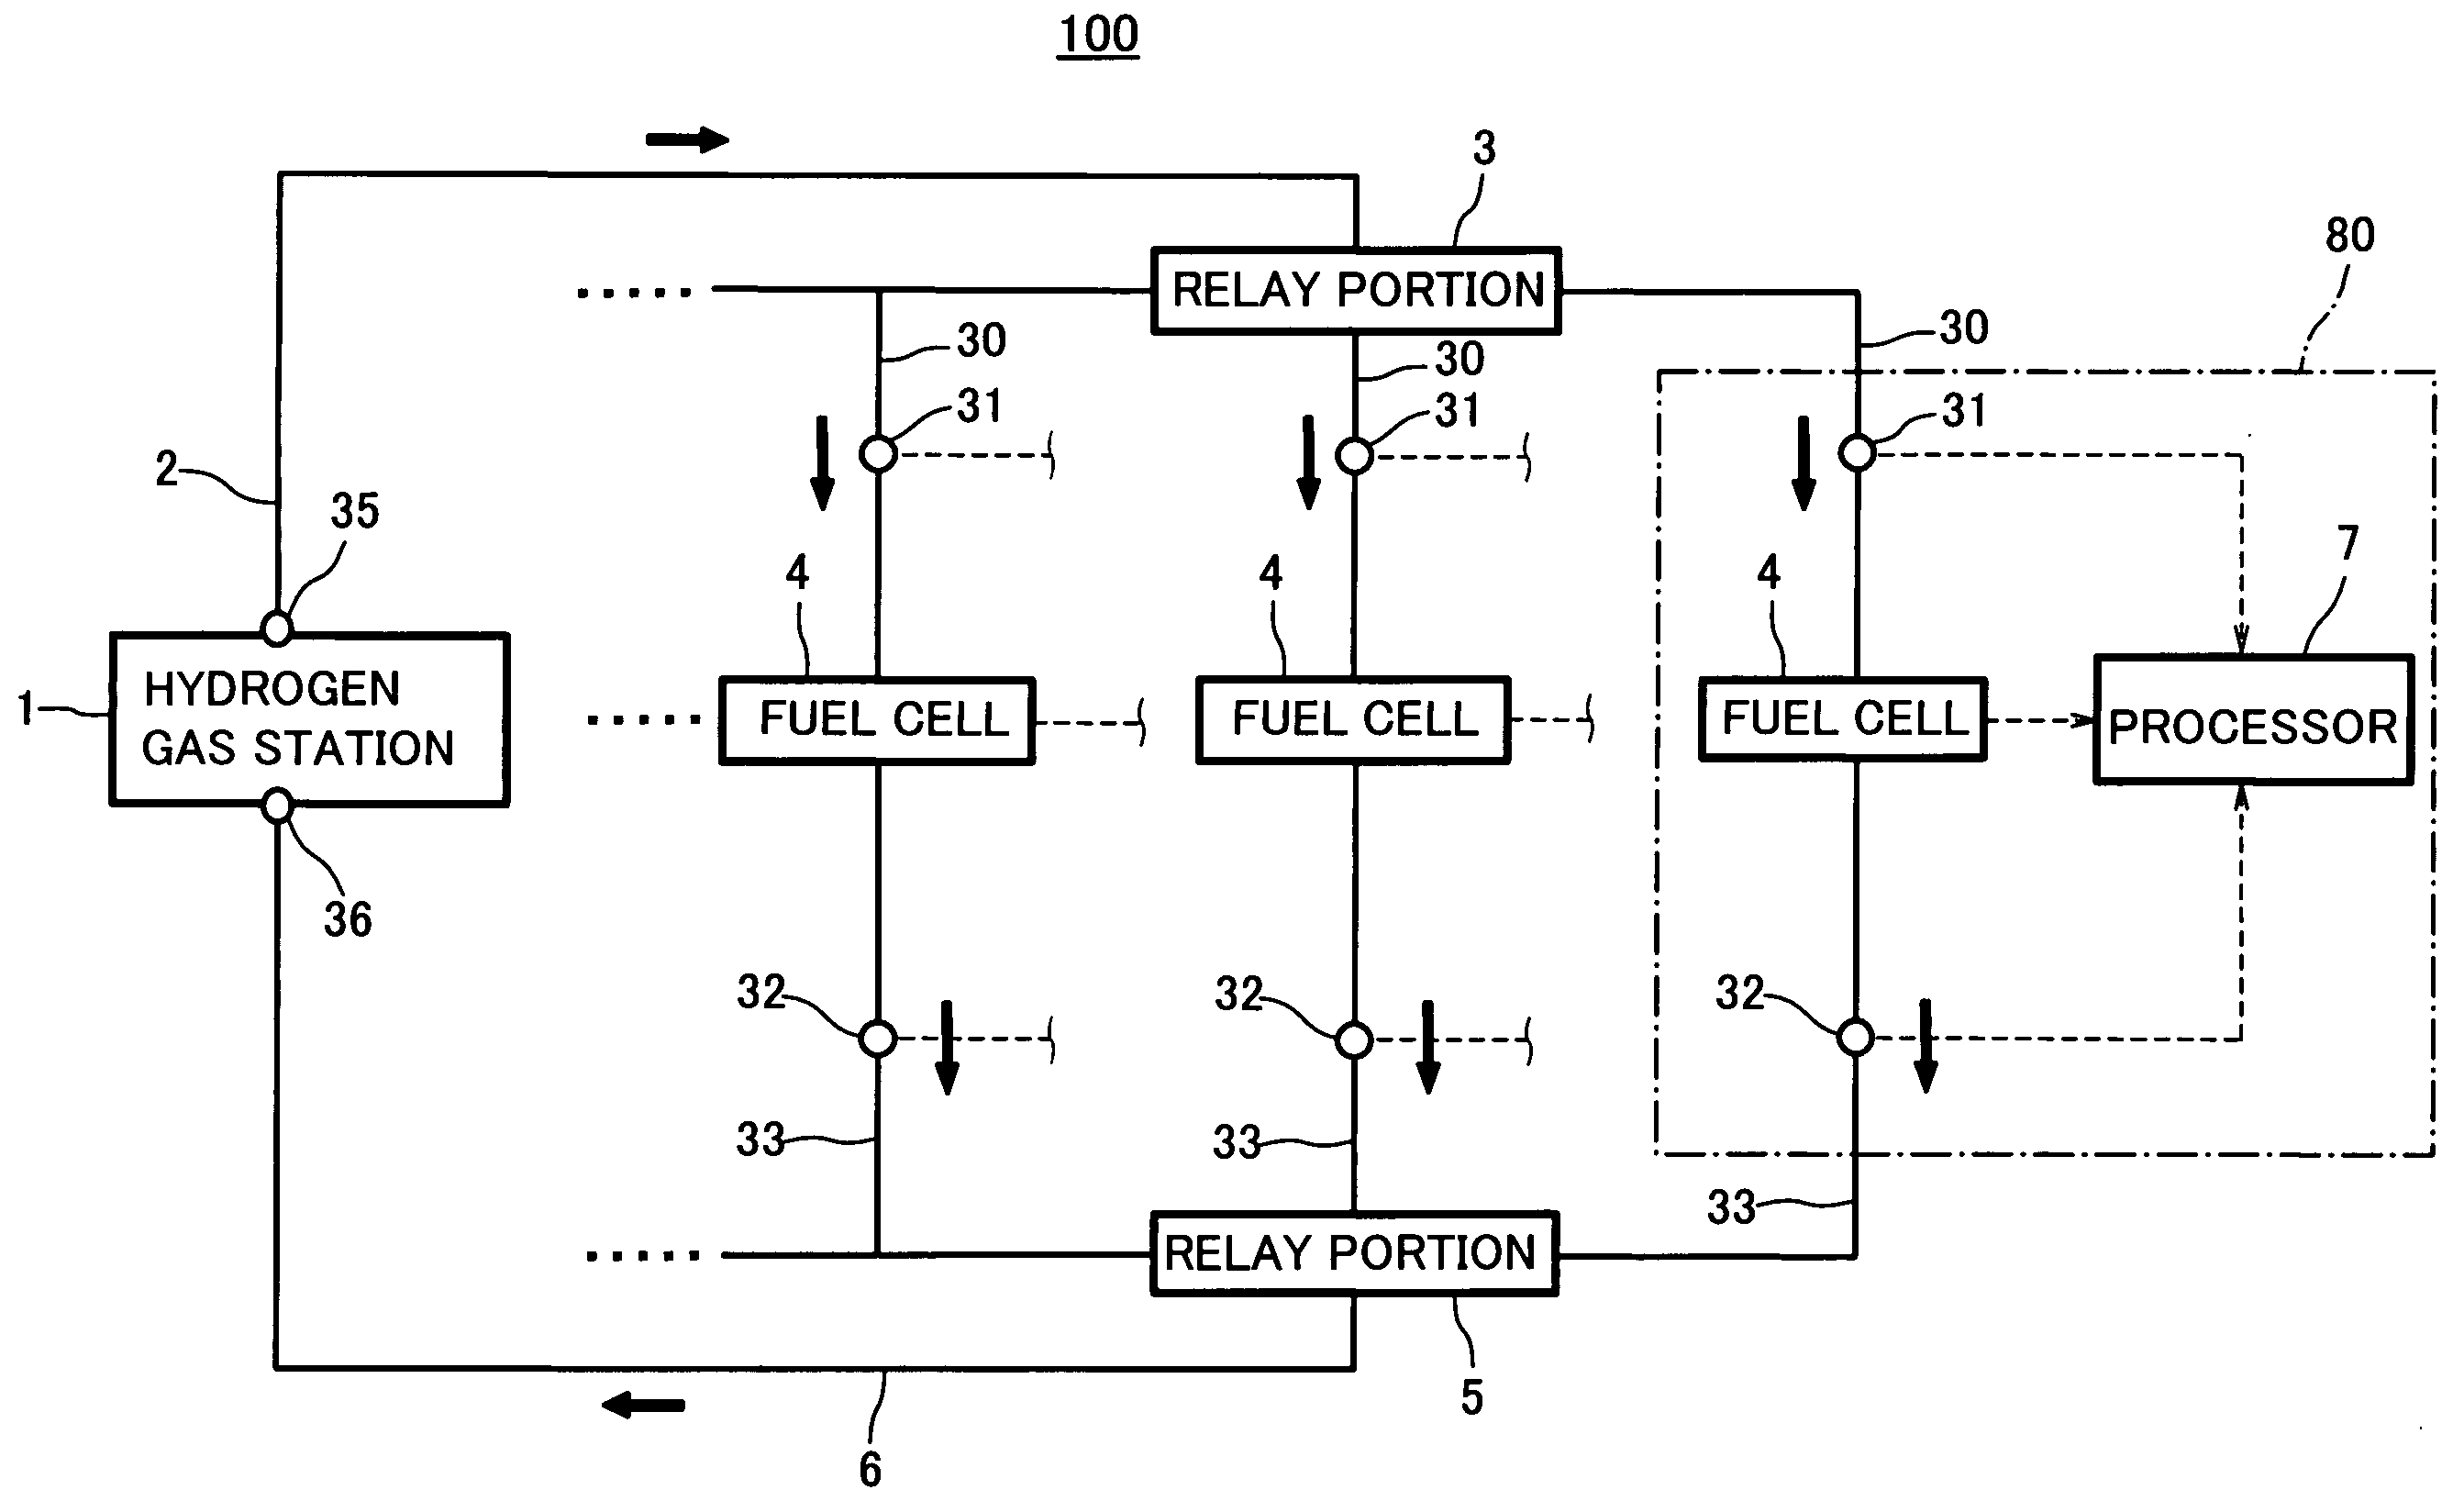 Hydrogen gas station, fuel cell system, and hydrogen gas rate accounting device